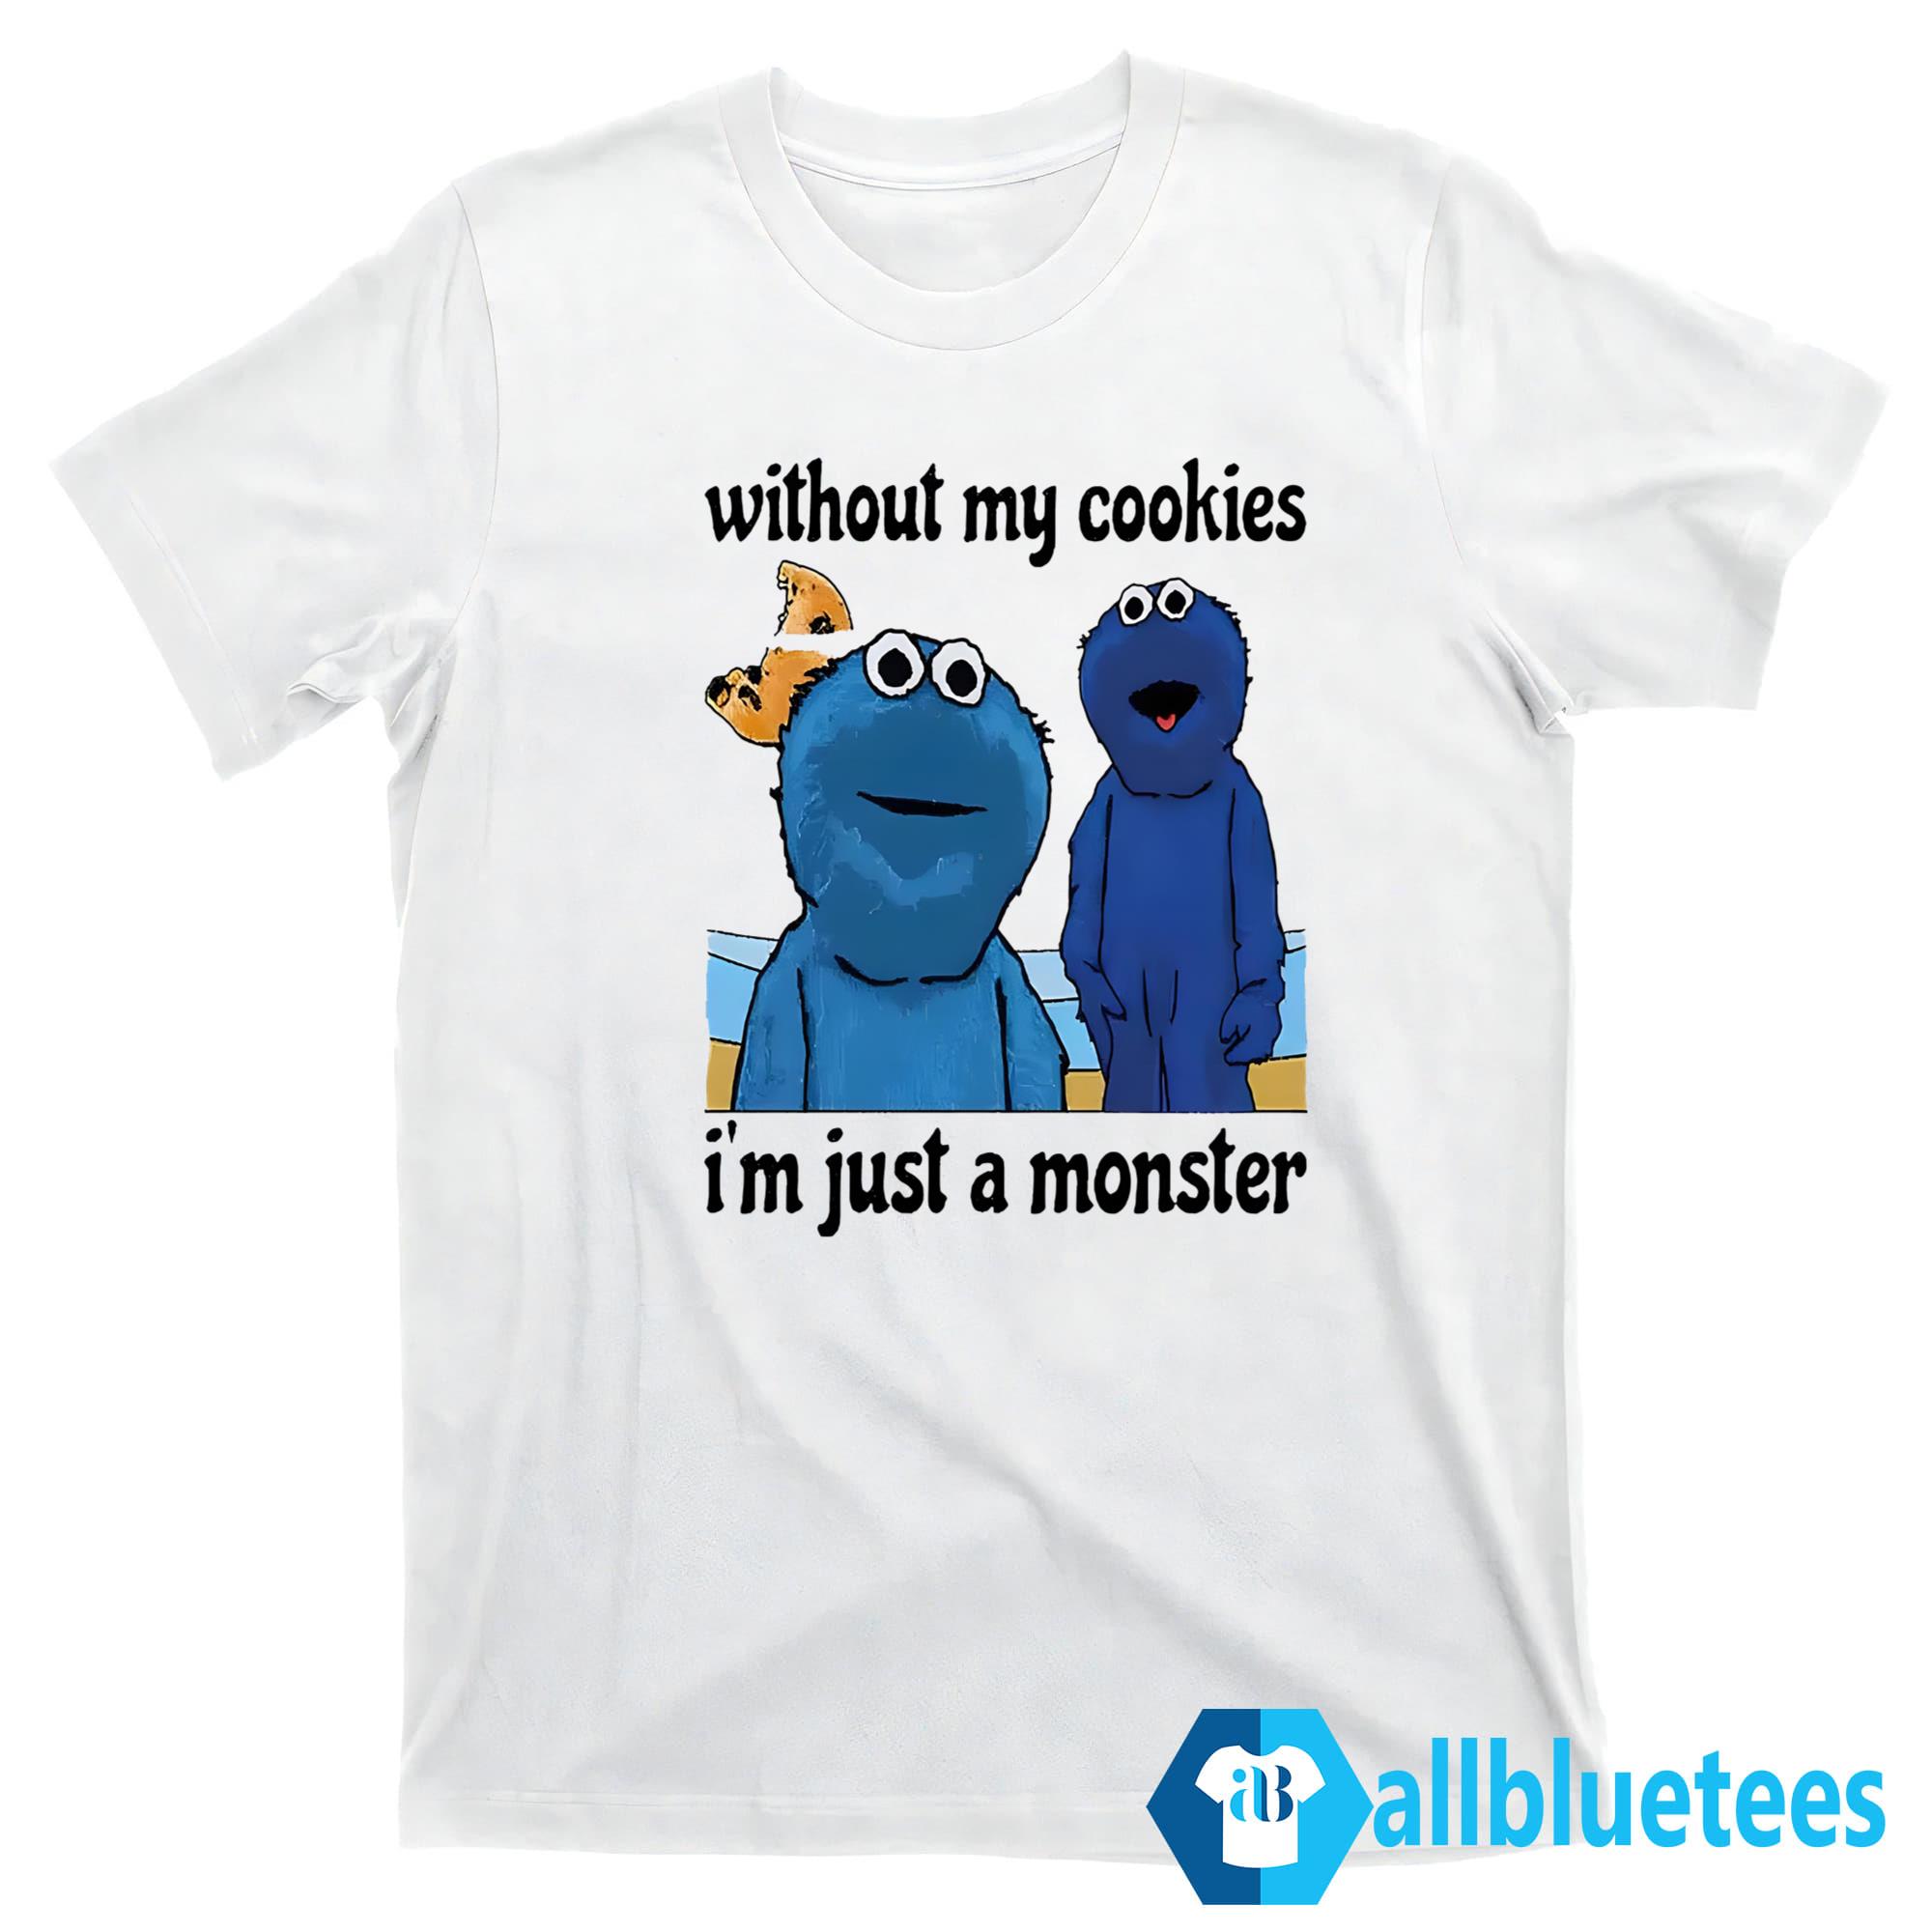 Oh No, Not Again!, It seems as though Cookie Monster can't …